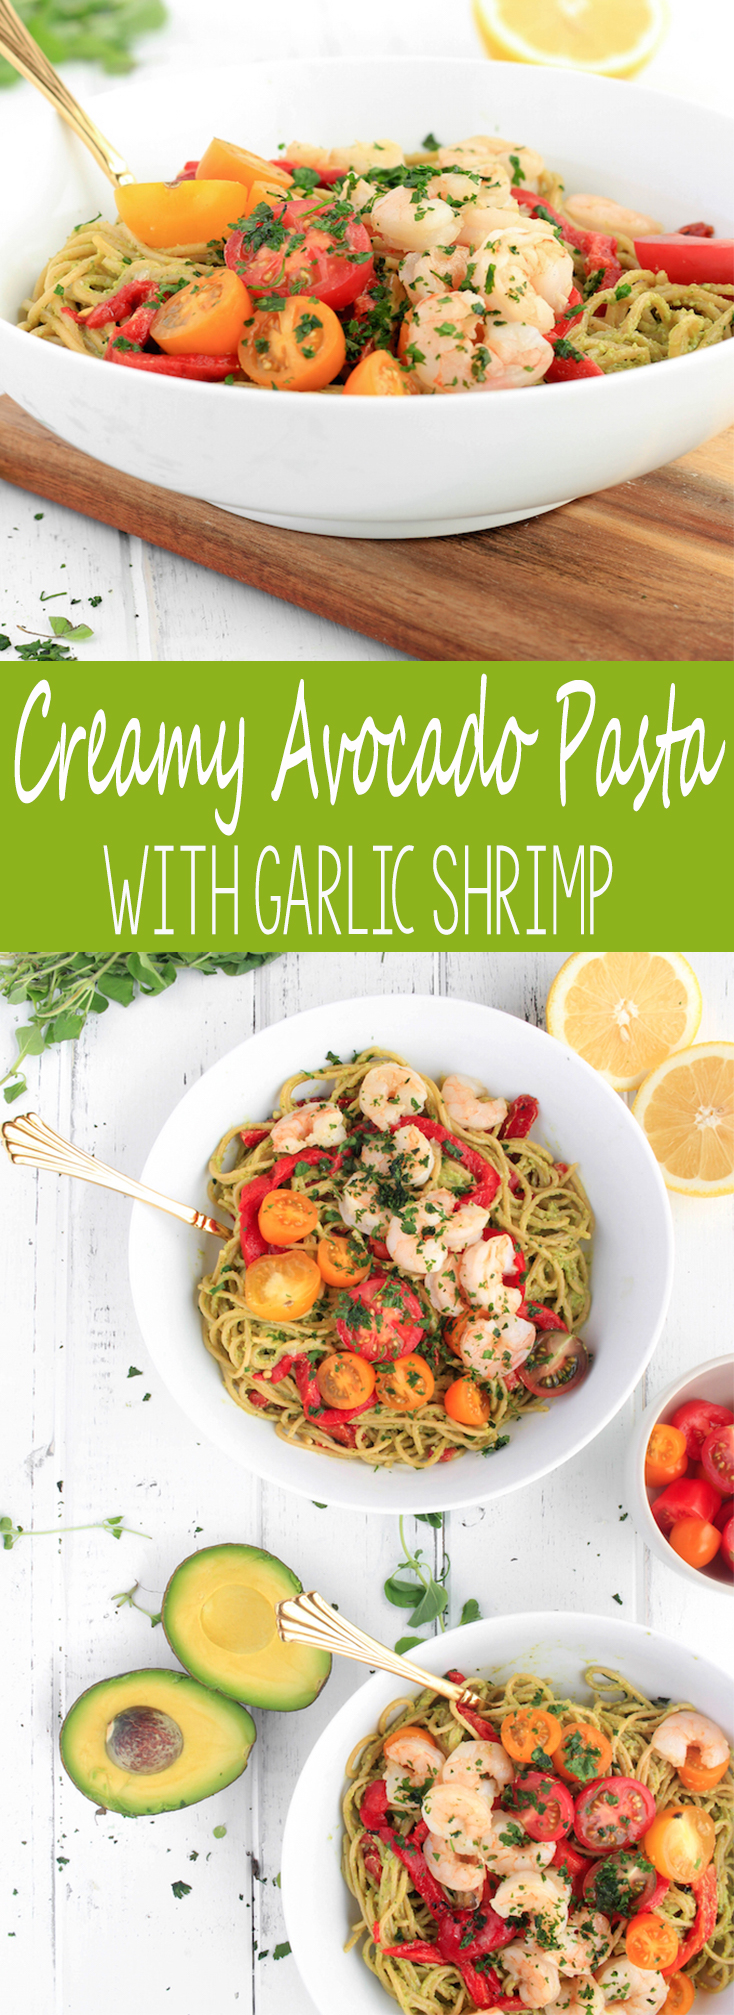 Creamy Avocado Pasta with Garlic Shrimp made with just 10 ingredients! Savory, simple and healthy - perfect for a satisfying weeknight meal.